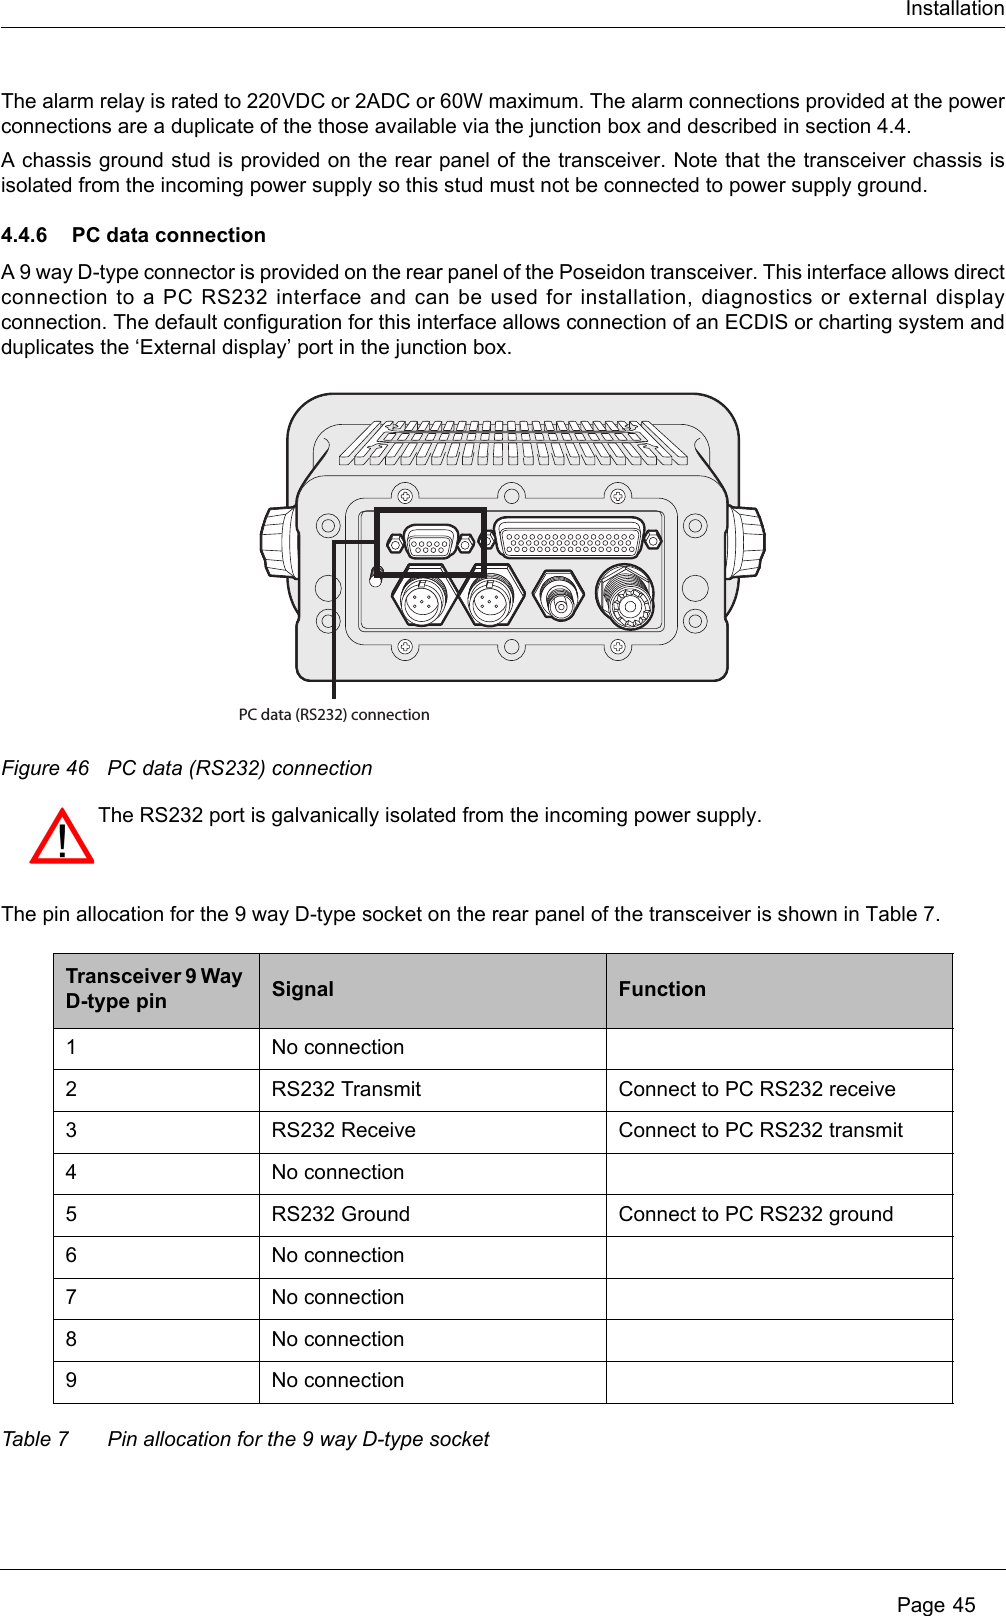 InstallationPage 45The alarm relay is rated to 220VDC or 2ADC or 60W maximum. The alarm connections provided at the powerconnections are a duplicate of the those available via the junction box and described in section 4.4. A chassis ground stud is provided on the rear panel of the transceiver. Note that the transceiver chassis isisolated from the incoming power supply so this stud must not be connected to power supply ground.4.4.6 PC data connectionA 9 way D-type connector is provided on the rear panel of the Poseidon transceiver. This interface allows directconnection to a PC RS232 interface and can be used for installation, diagnostics or external displayconnection. The default configuration for this interface allows connection of an ECDIS or charting system andduplicates the ‘External display’ port in the junction box.Figure 46 PC data (RS232) connectionThe pin allocation for the 9 way D-type socket on the rear panel of the transceiver is shown in Table 7.Table 7 Pin allocation for the 9 way D-type socketTransceiver 9 Way D-type pin Signal Function1 No connection2 RS232 Transmit Connect to PC RS232 receive3 RS232 Receive Connect to PC RS232 transmit4 No connection5 RS232 Ground Connect to PC RS232 ground6 No connection7 No connection8 No connection9 No connectionPC data (RS232) connectionThe RS232 port is galvanically isolated from the incoming power supply. 